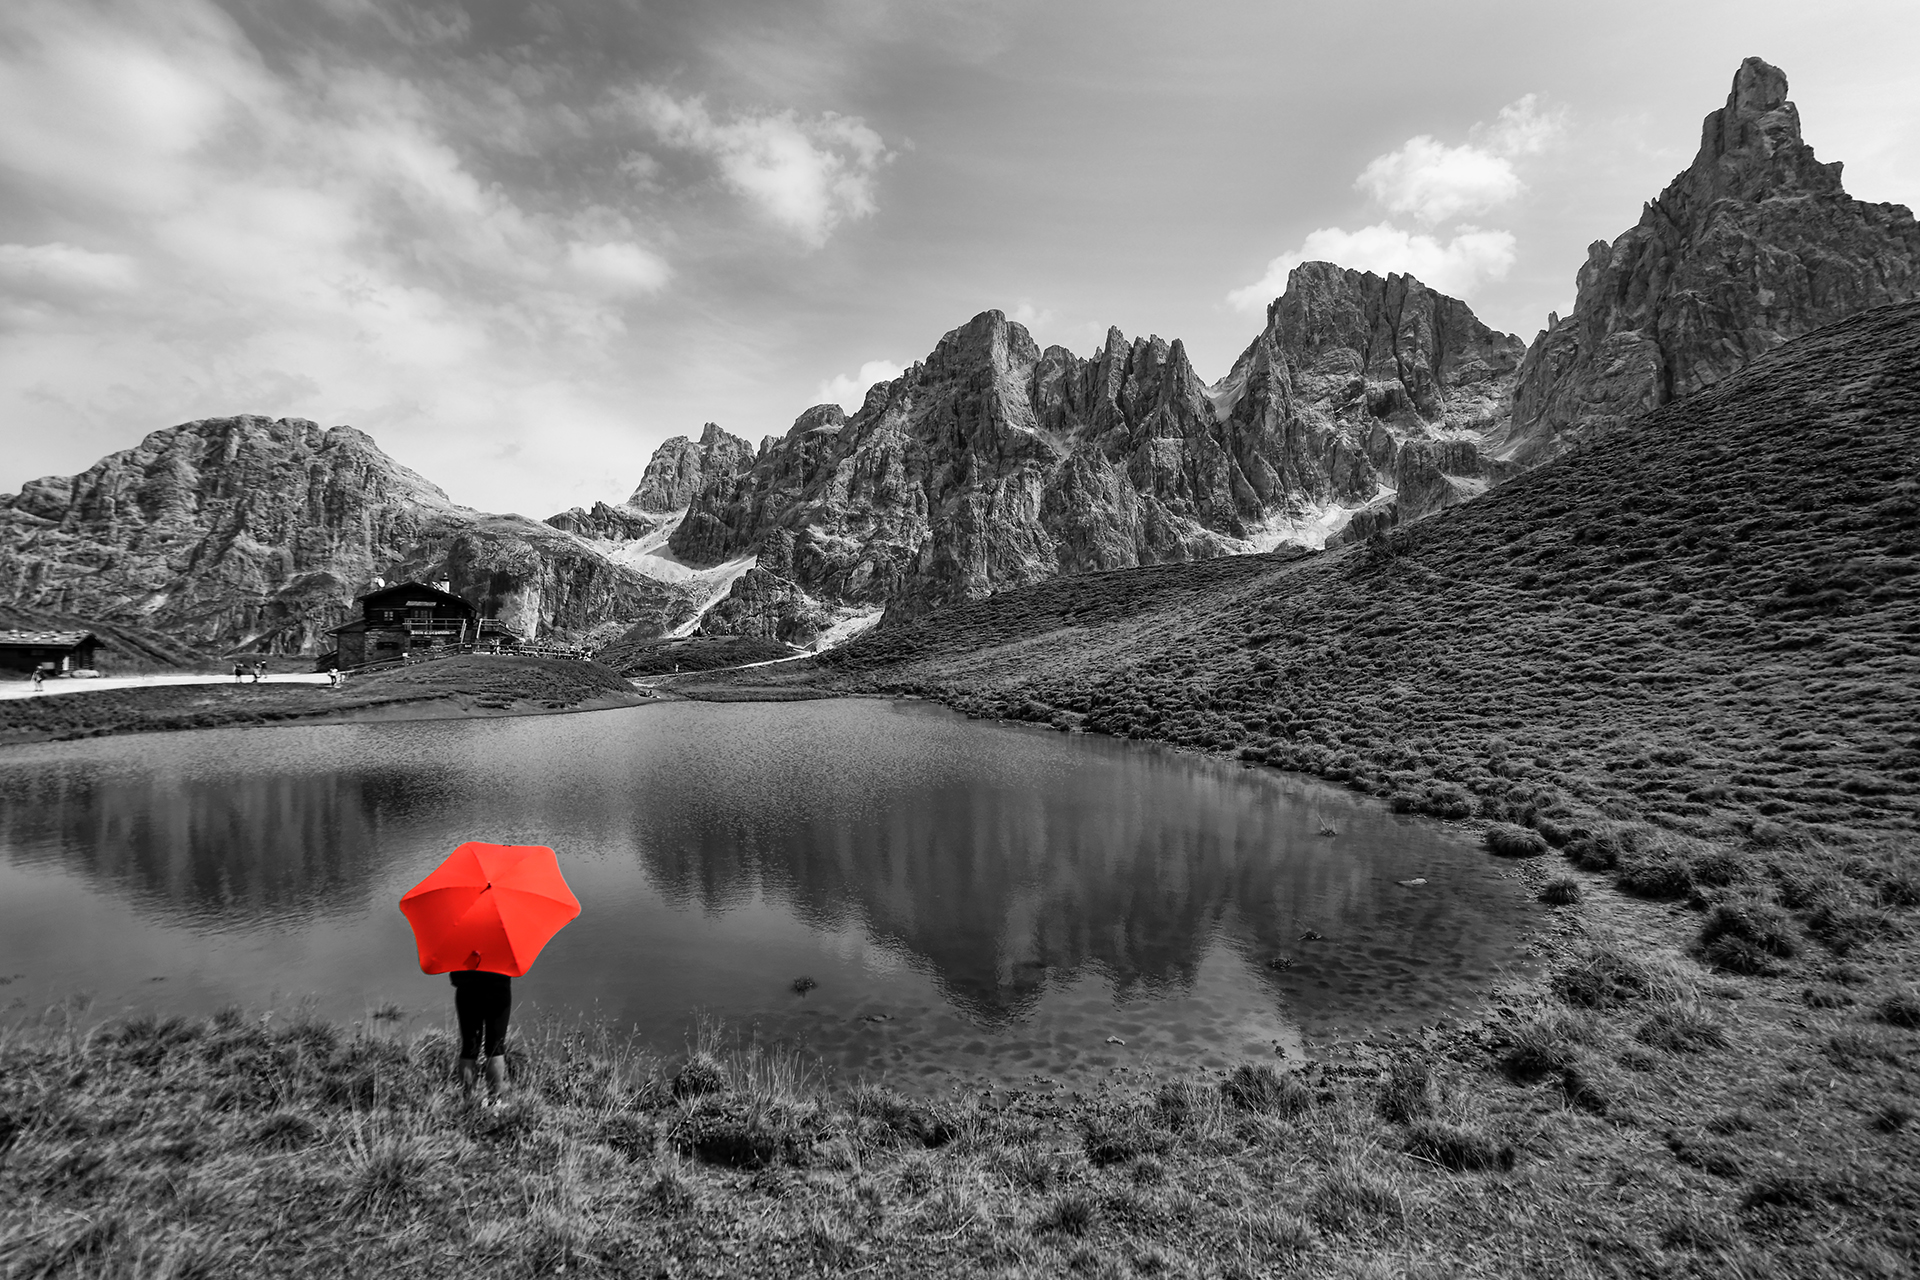 A red umbrella on the lake...